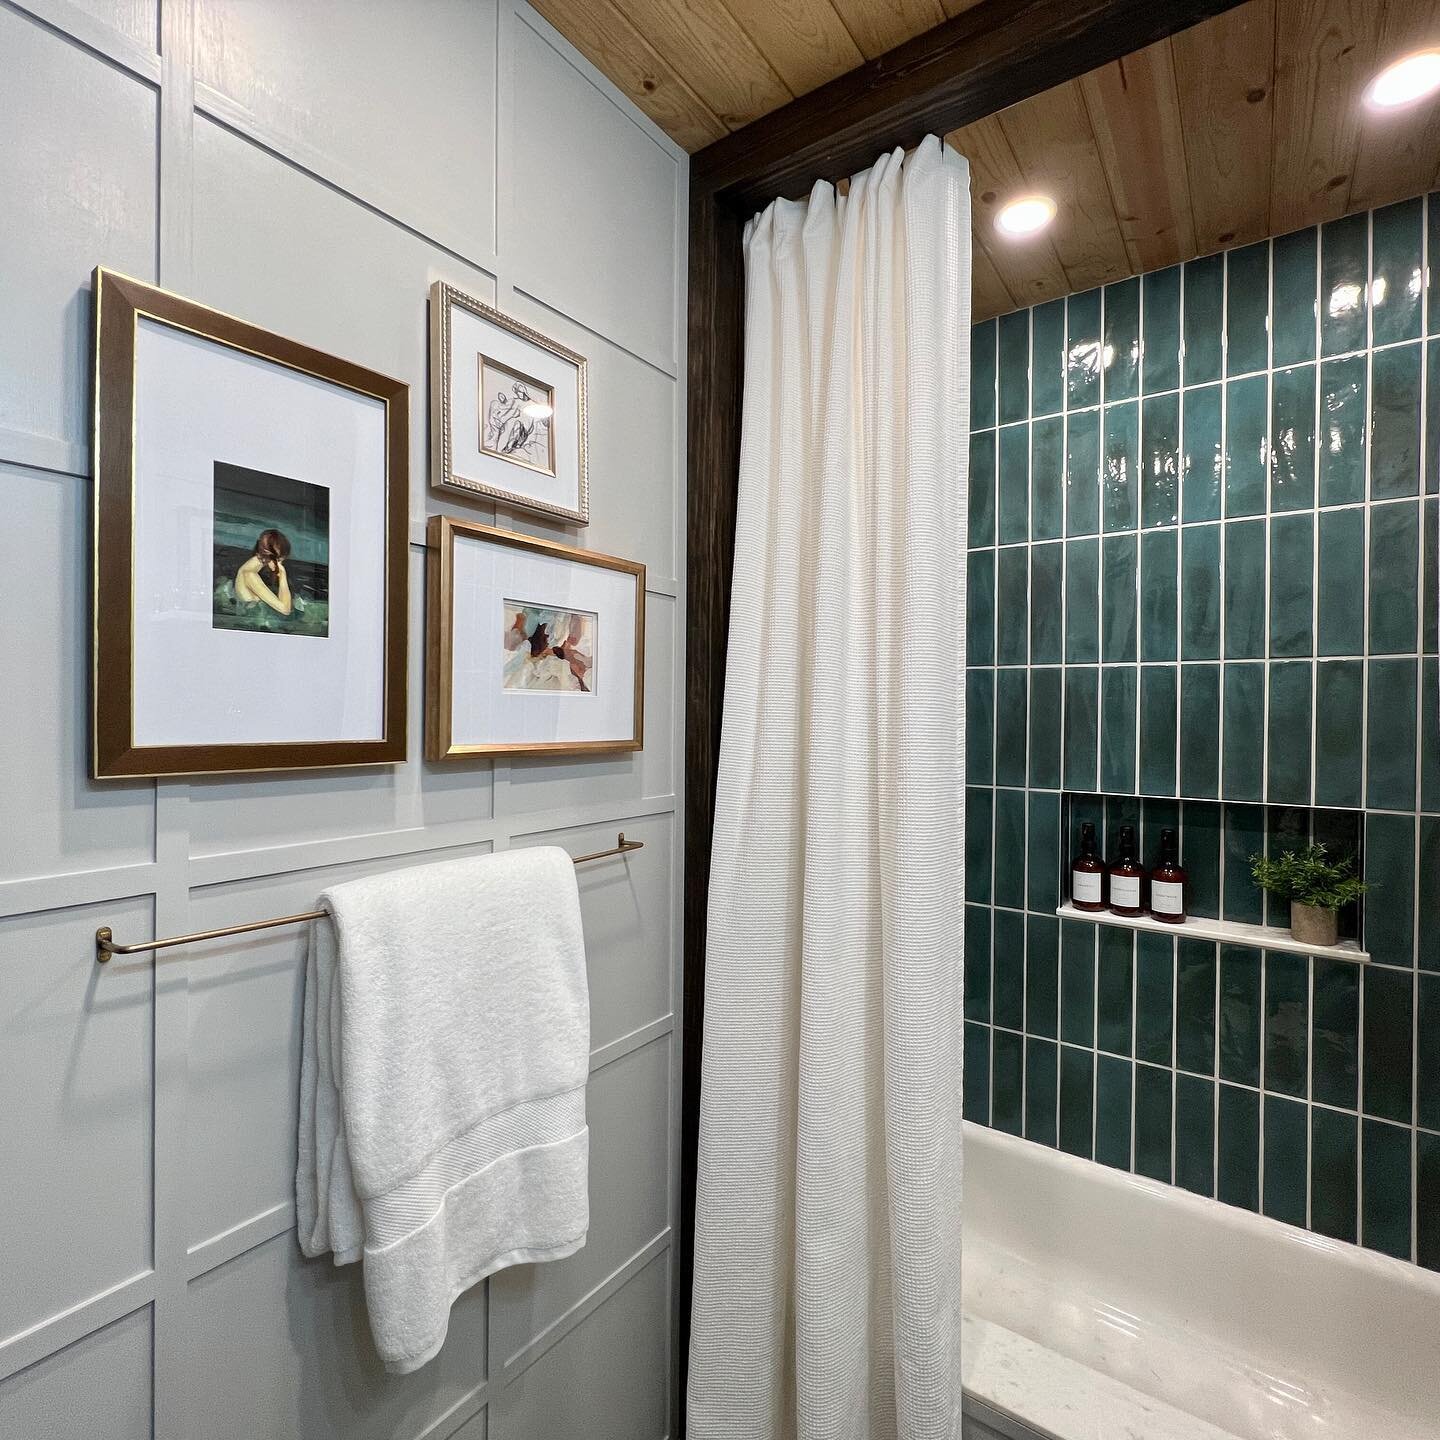 Our newly-renovated guest bathroom finally has art! 

Head to the reveal post on our blog for all the sources for this renovation, including the new art and accessories. Link in bio.

#loneoakdesignco #ourhome #oneroomchallenge #apartmenttherapy